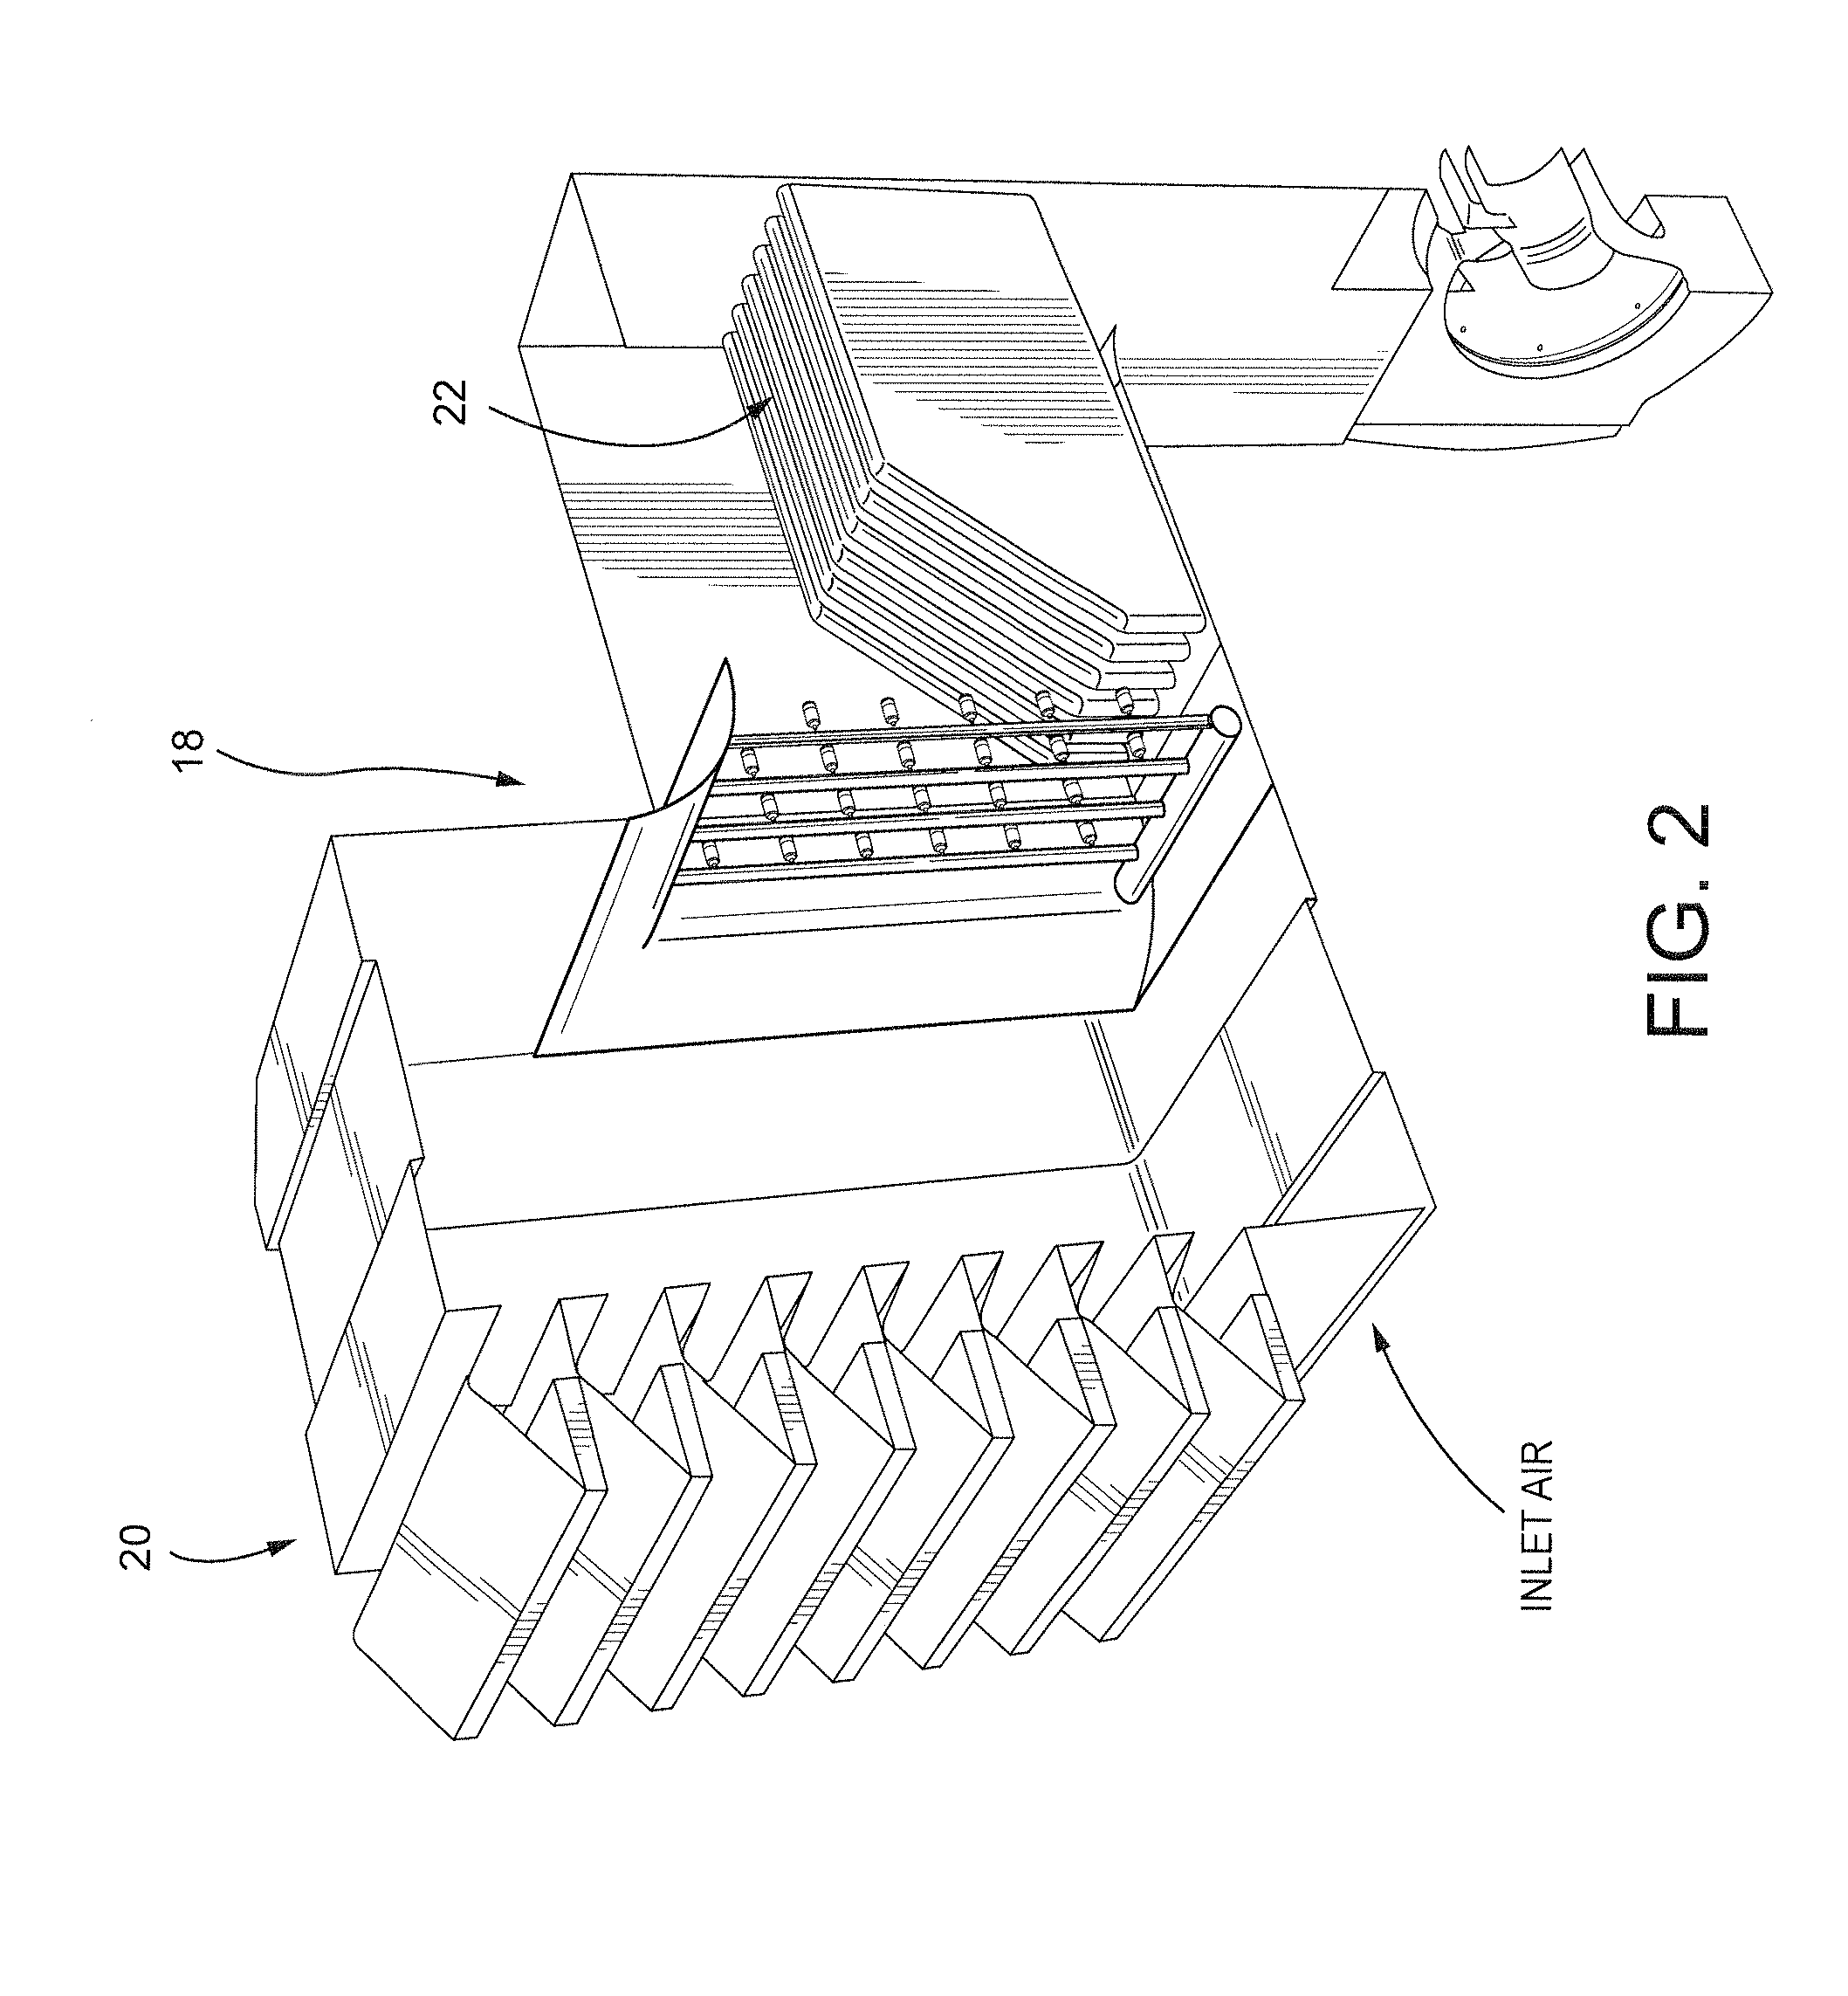 Ejector/Mixer Nozzle for Noise Reduction